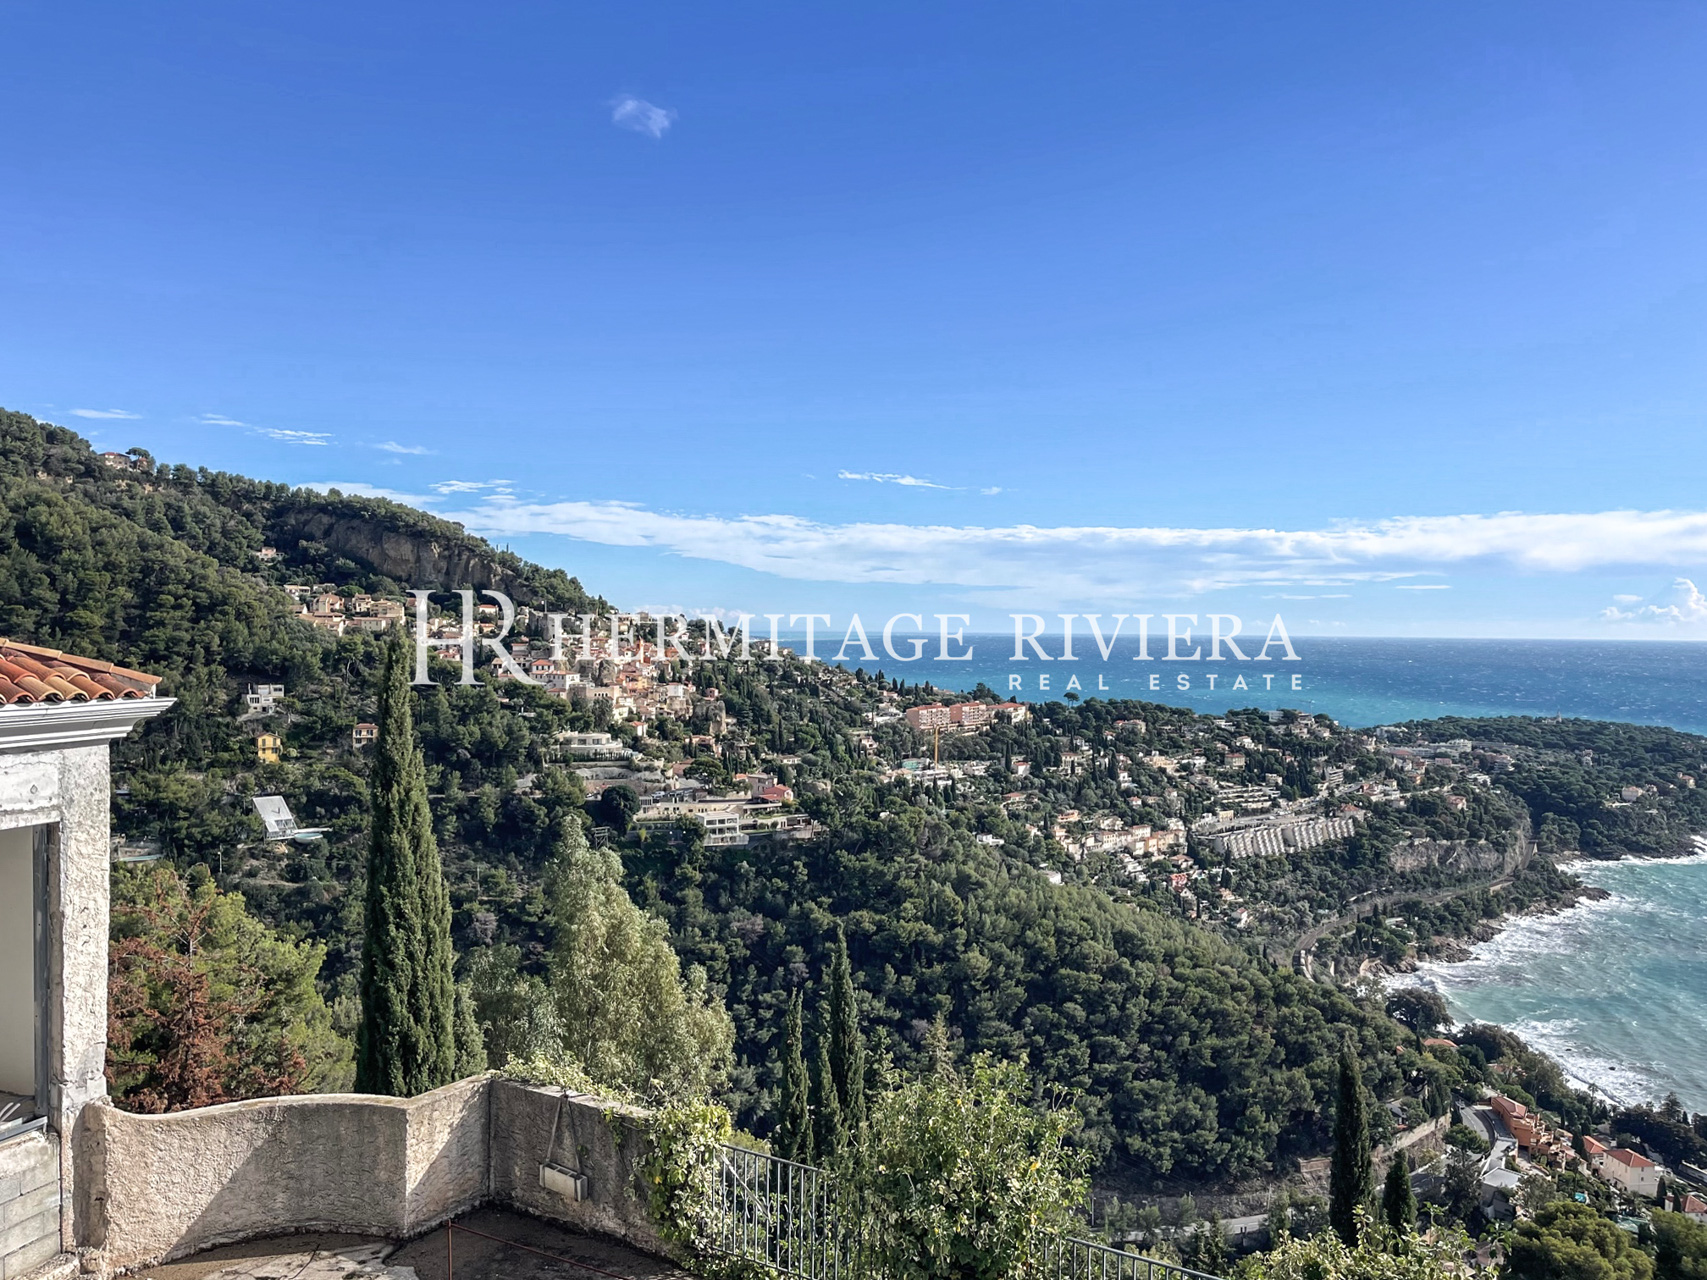 Property close Monaco with panoramic view  (image 8)